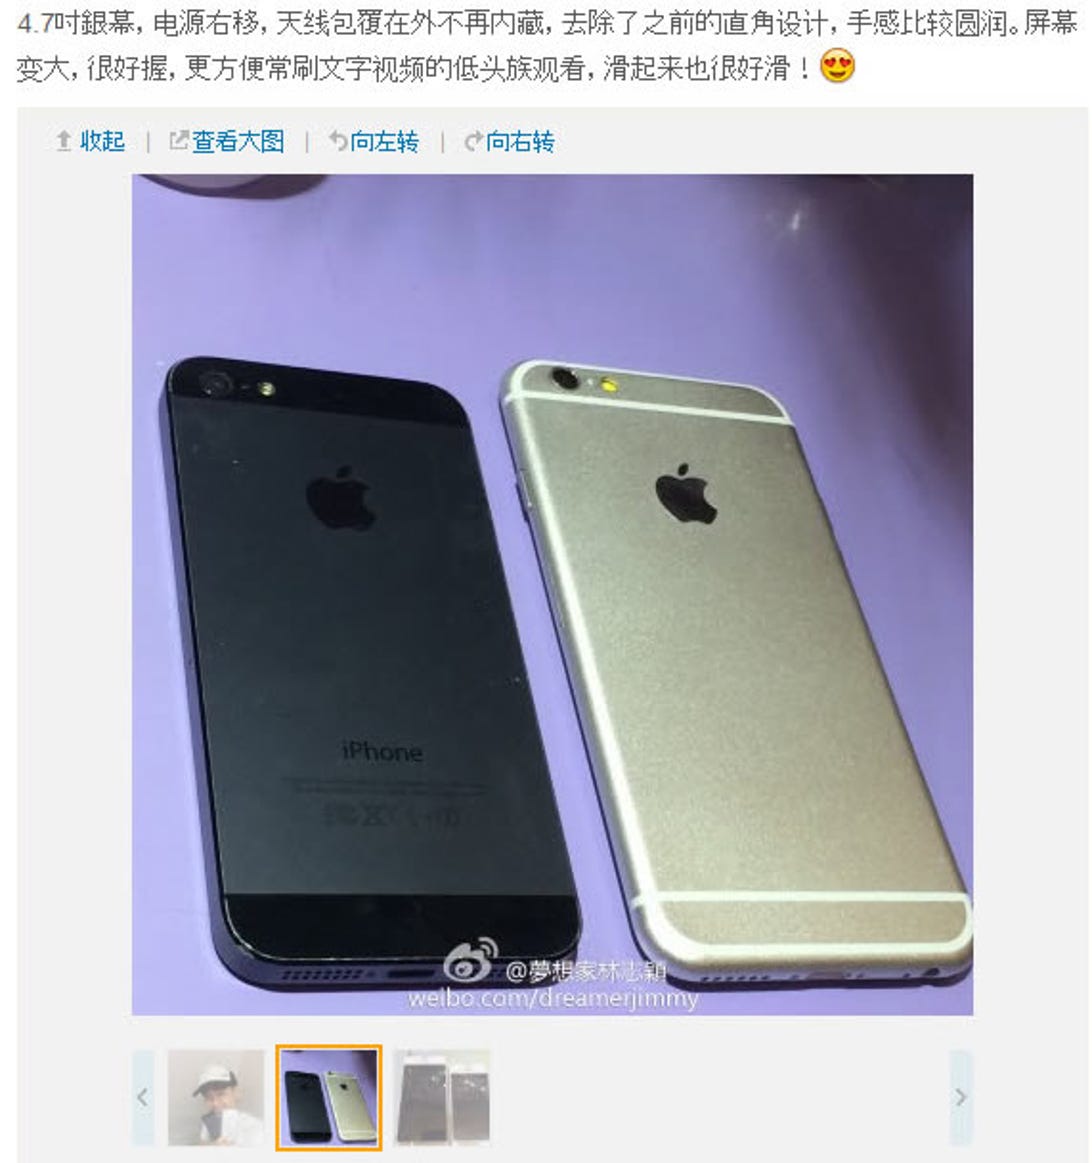 iphone6-lin-images.jpg